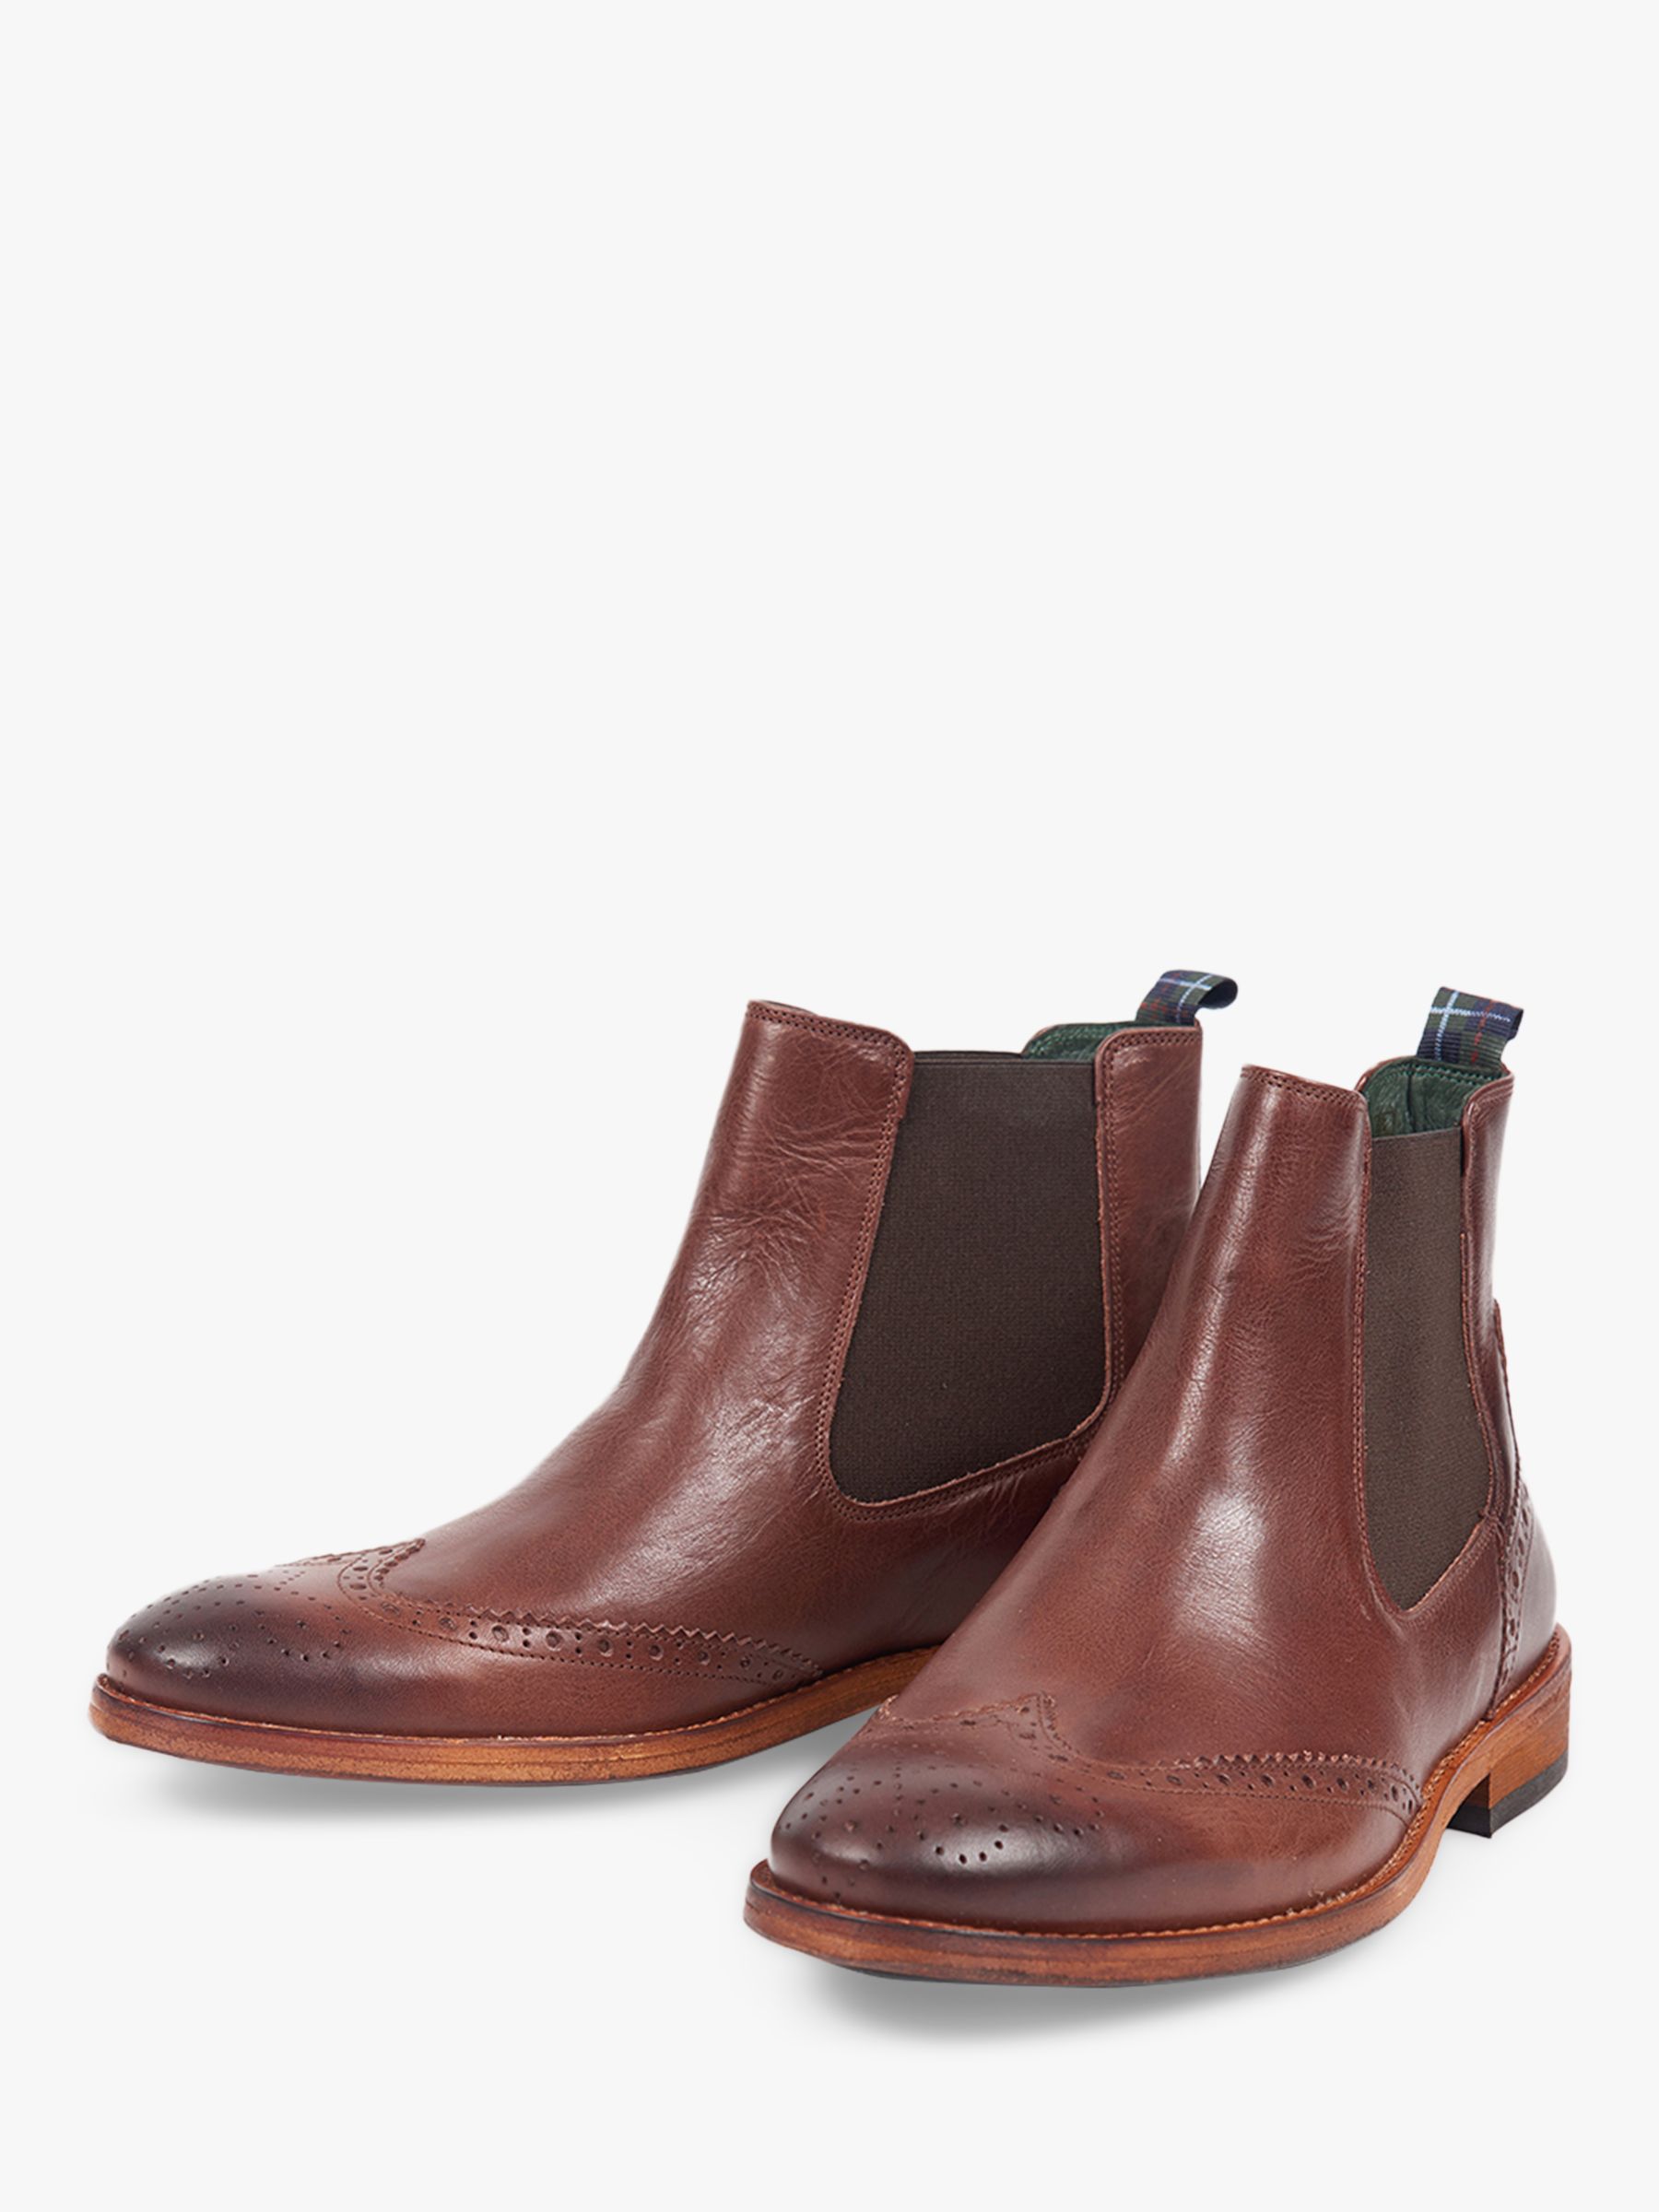 Barbour Raunds Chelsea Boots, Brown 